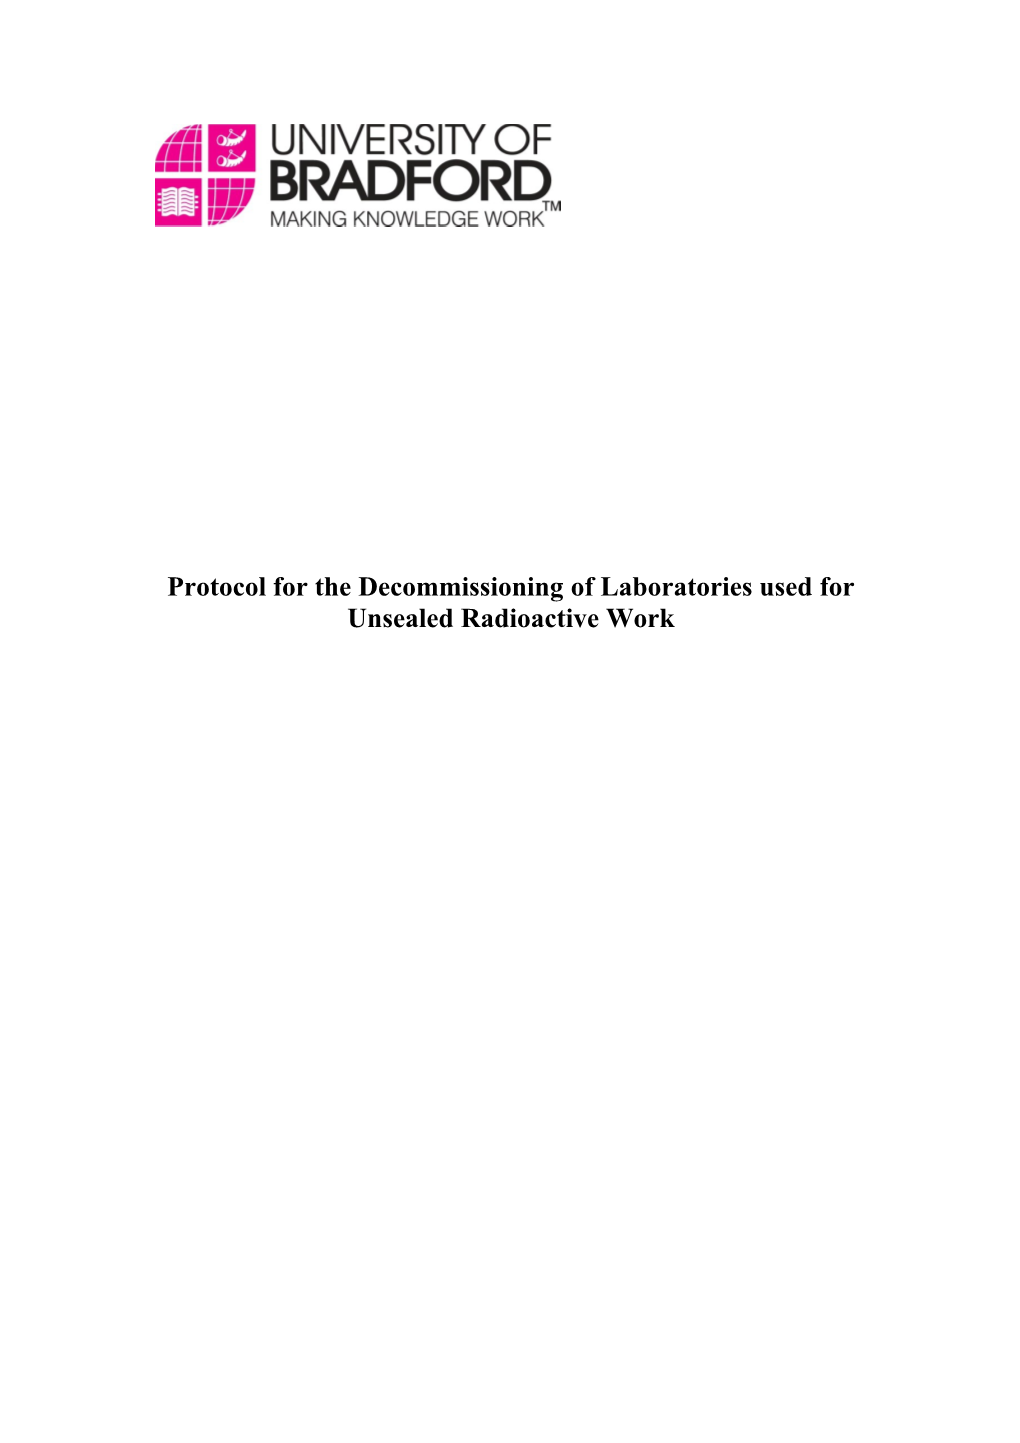 Protocol for the Decommissioning of Laboratories Used for Unsealed Radioactive Work